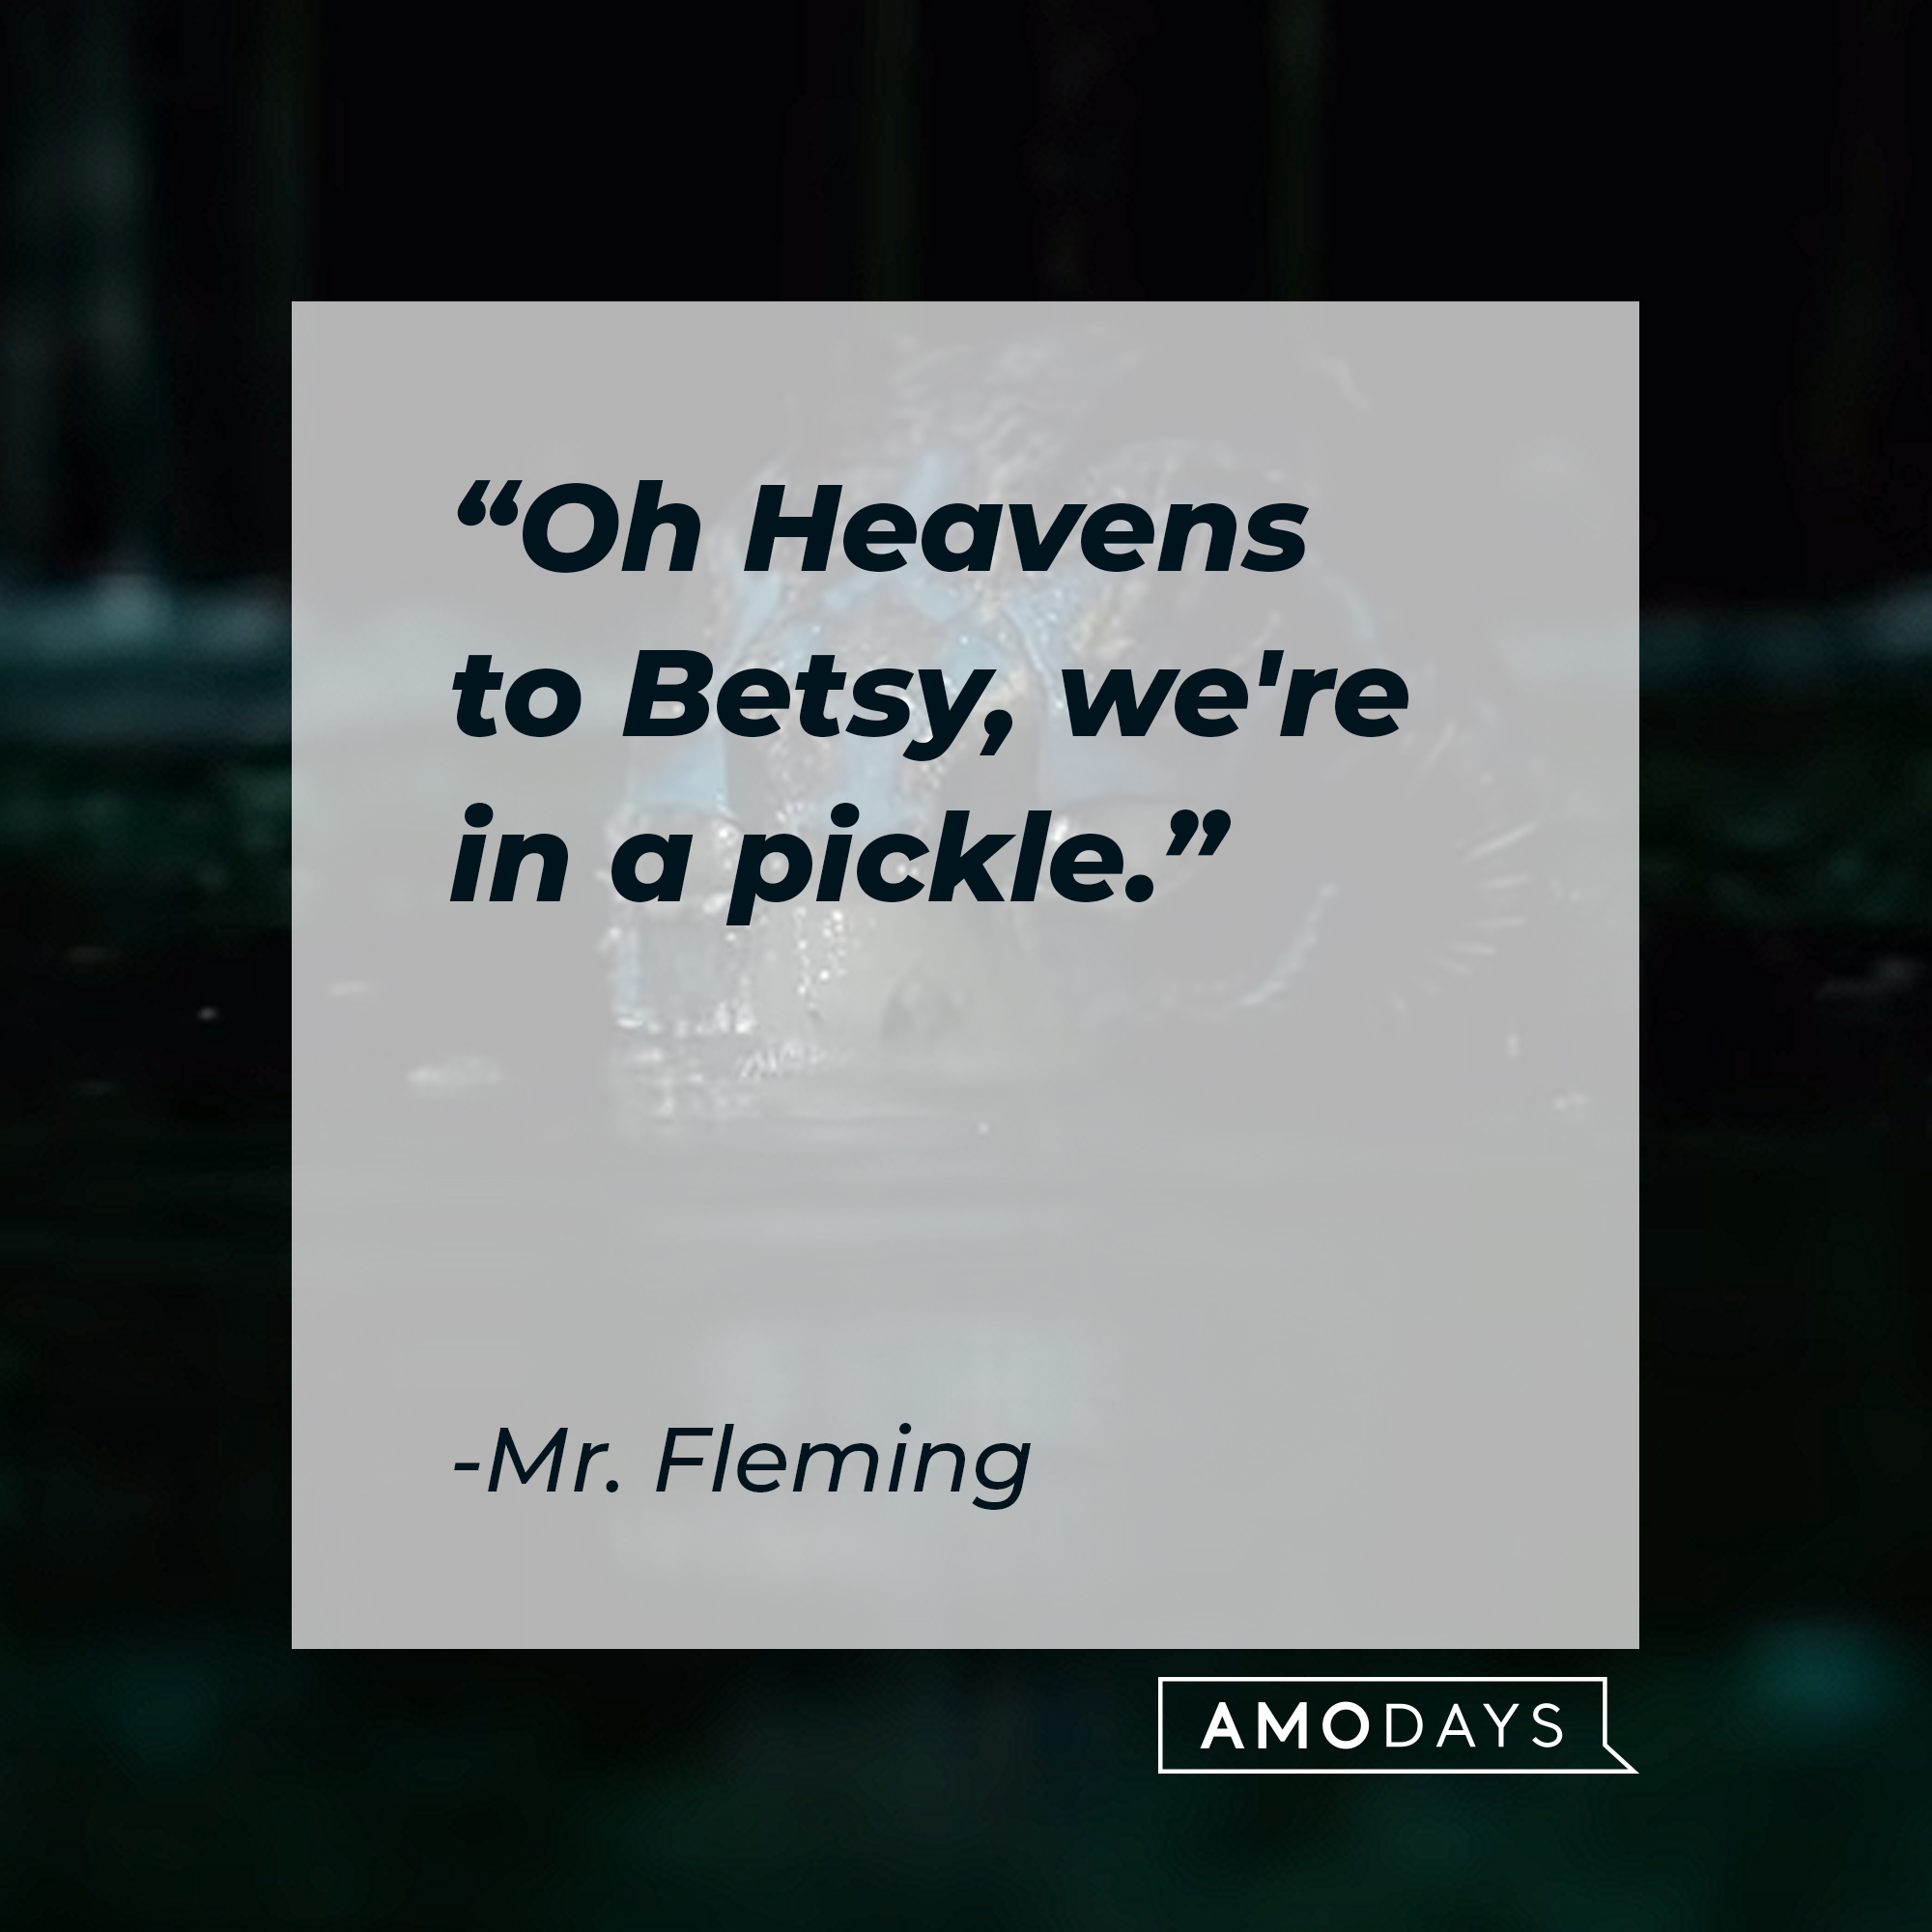 Mr. Fleming's quote : “Oh Heavens to Betsy, we’re in a pickle.” | Source:youtube.com/searchlightpictures